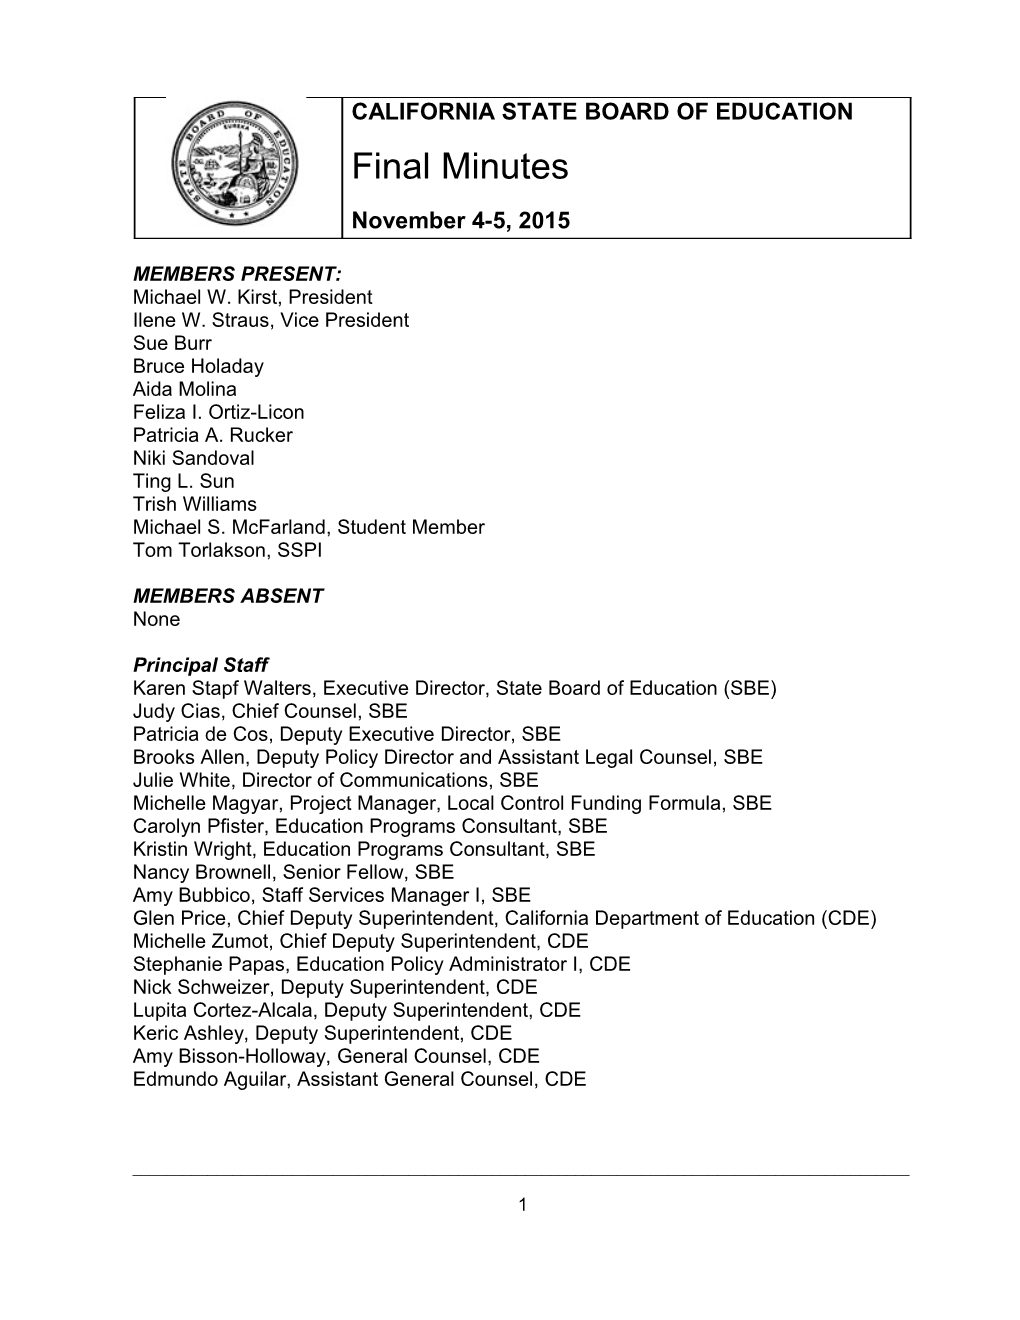 Final Minutes for November 2015 - SBE Minutes (CA State Board of Education)